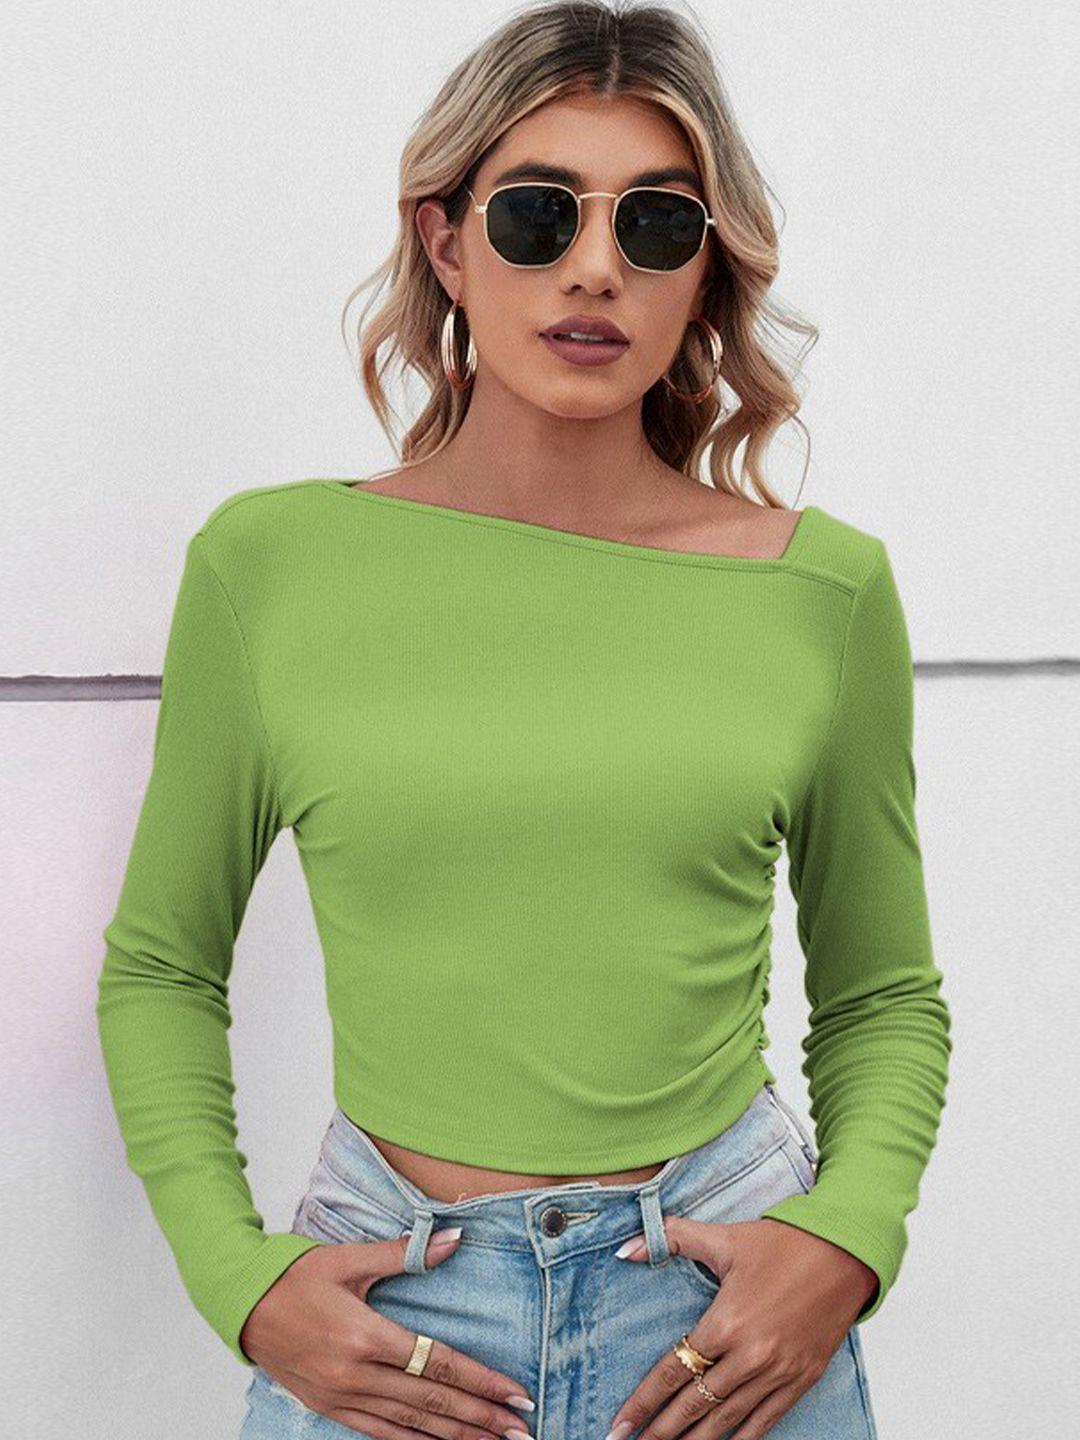 bostreet asymmetrical neck long sleeves fitted crop top